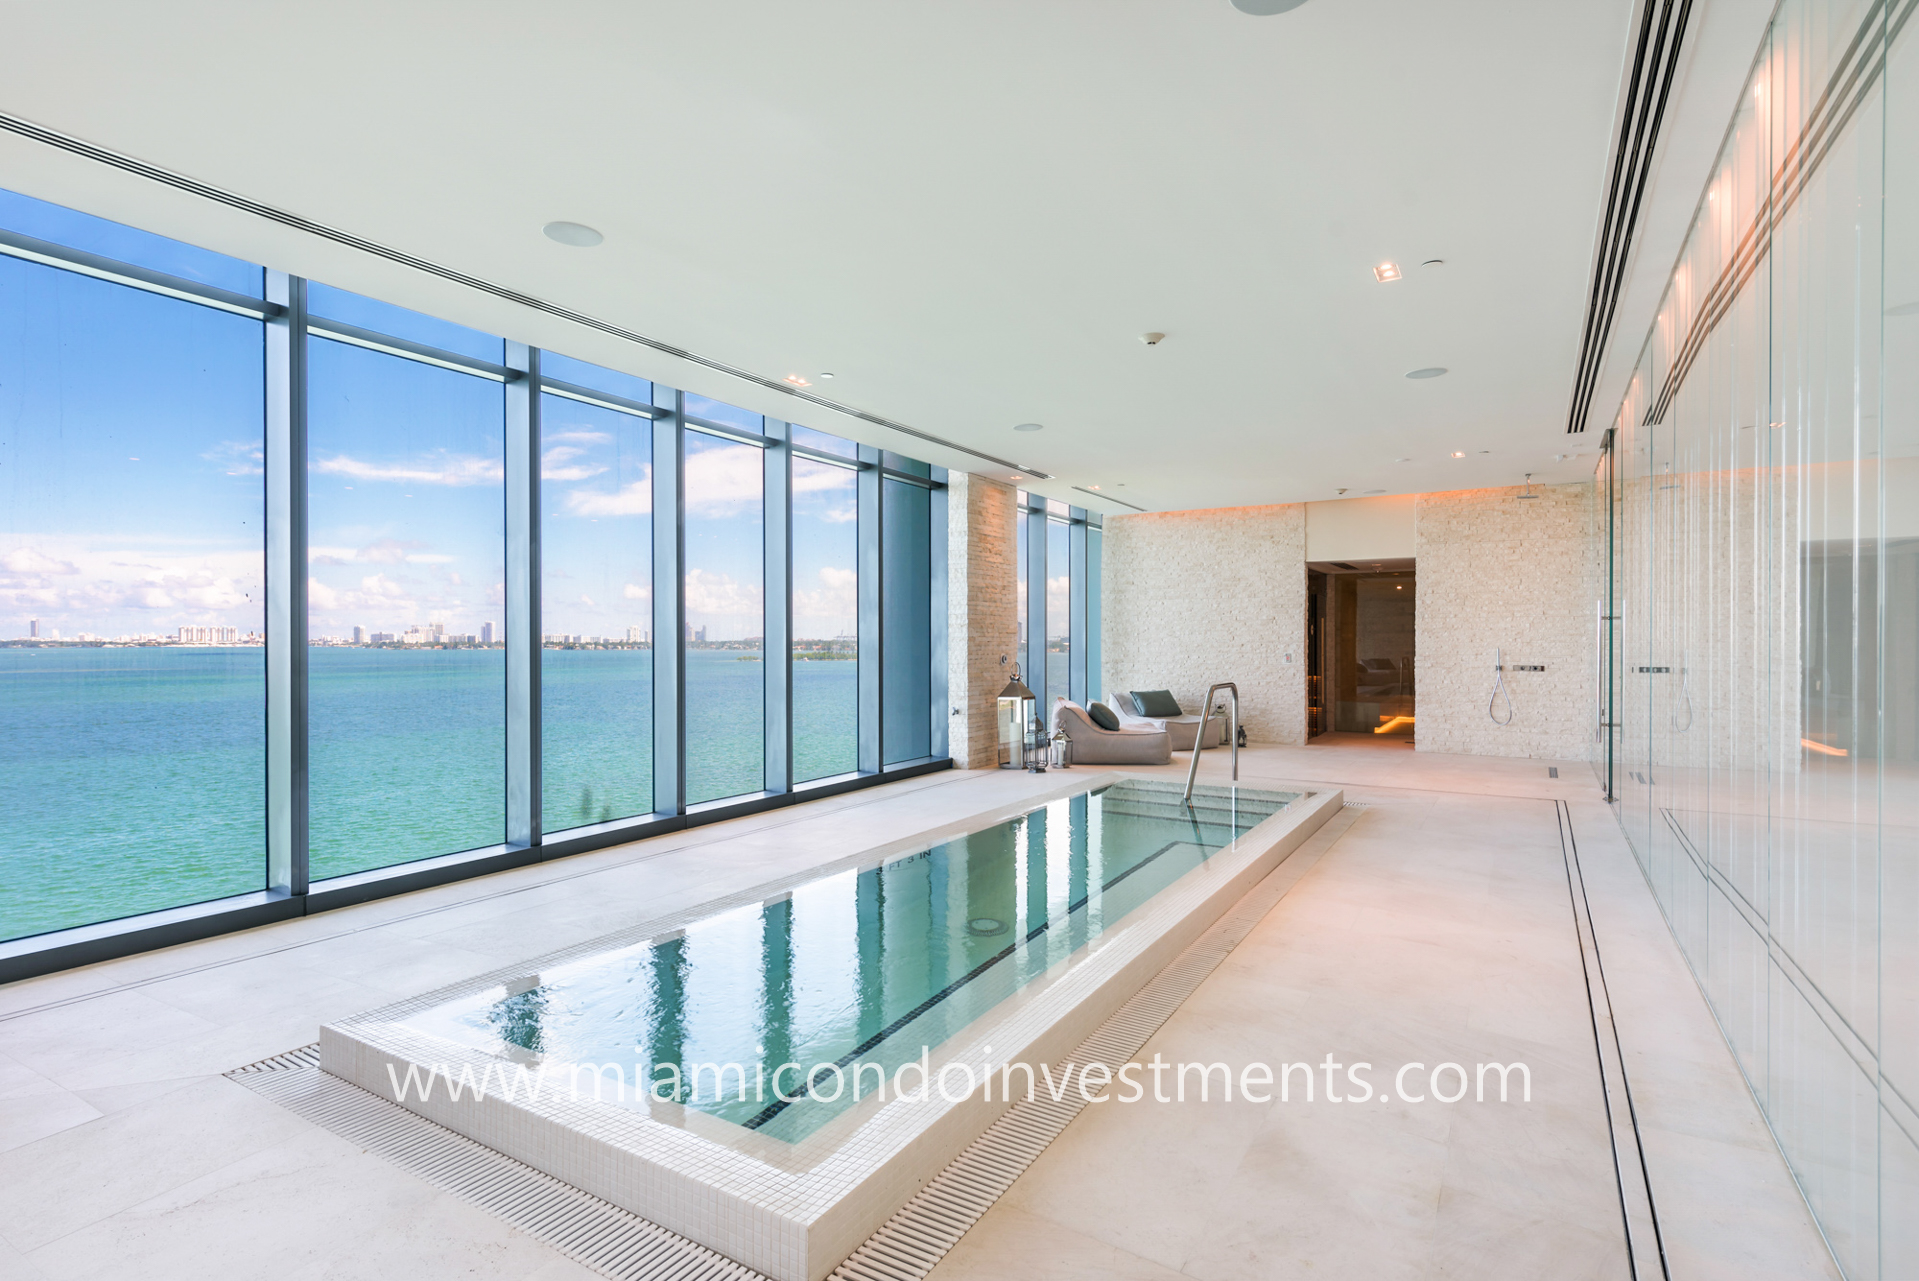 plunge pool with water view